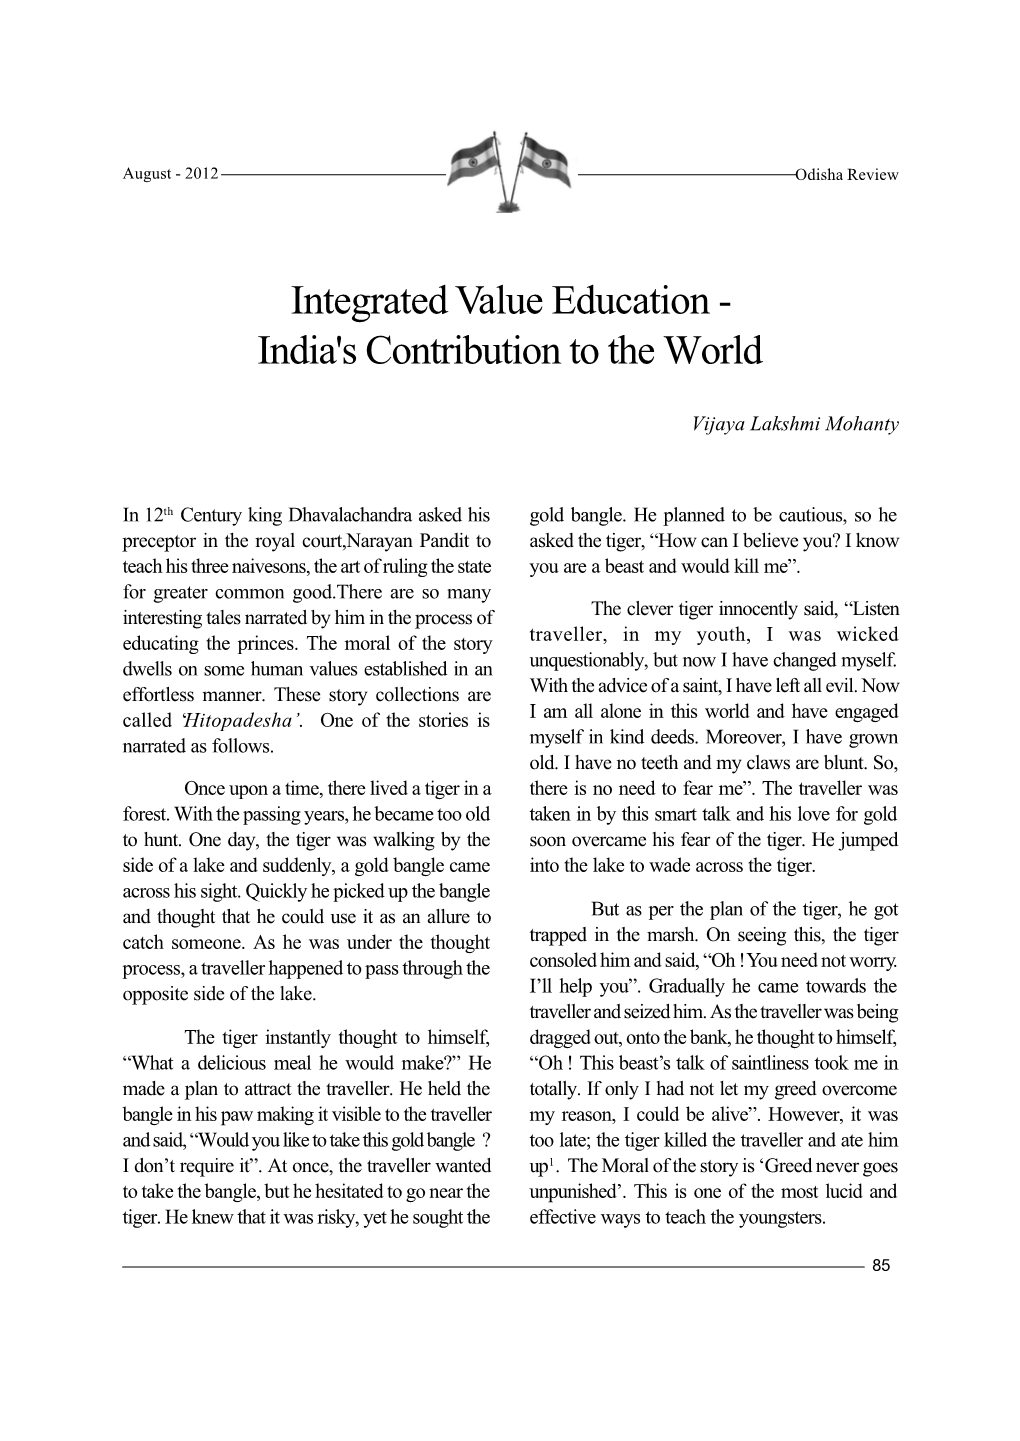 Integrated Value Education - India's Contribution to the World